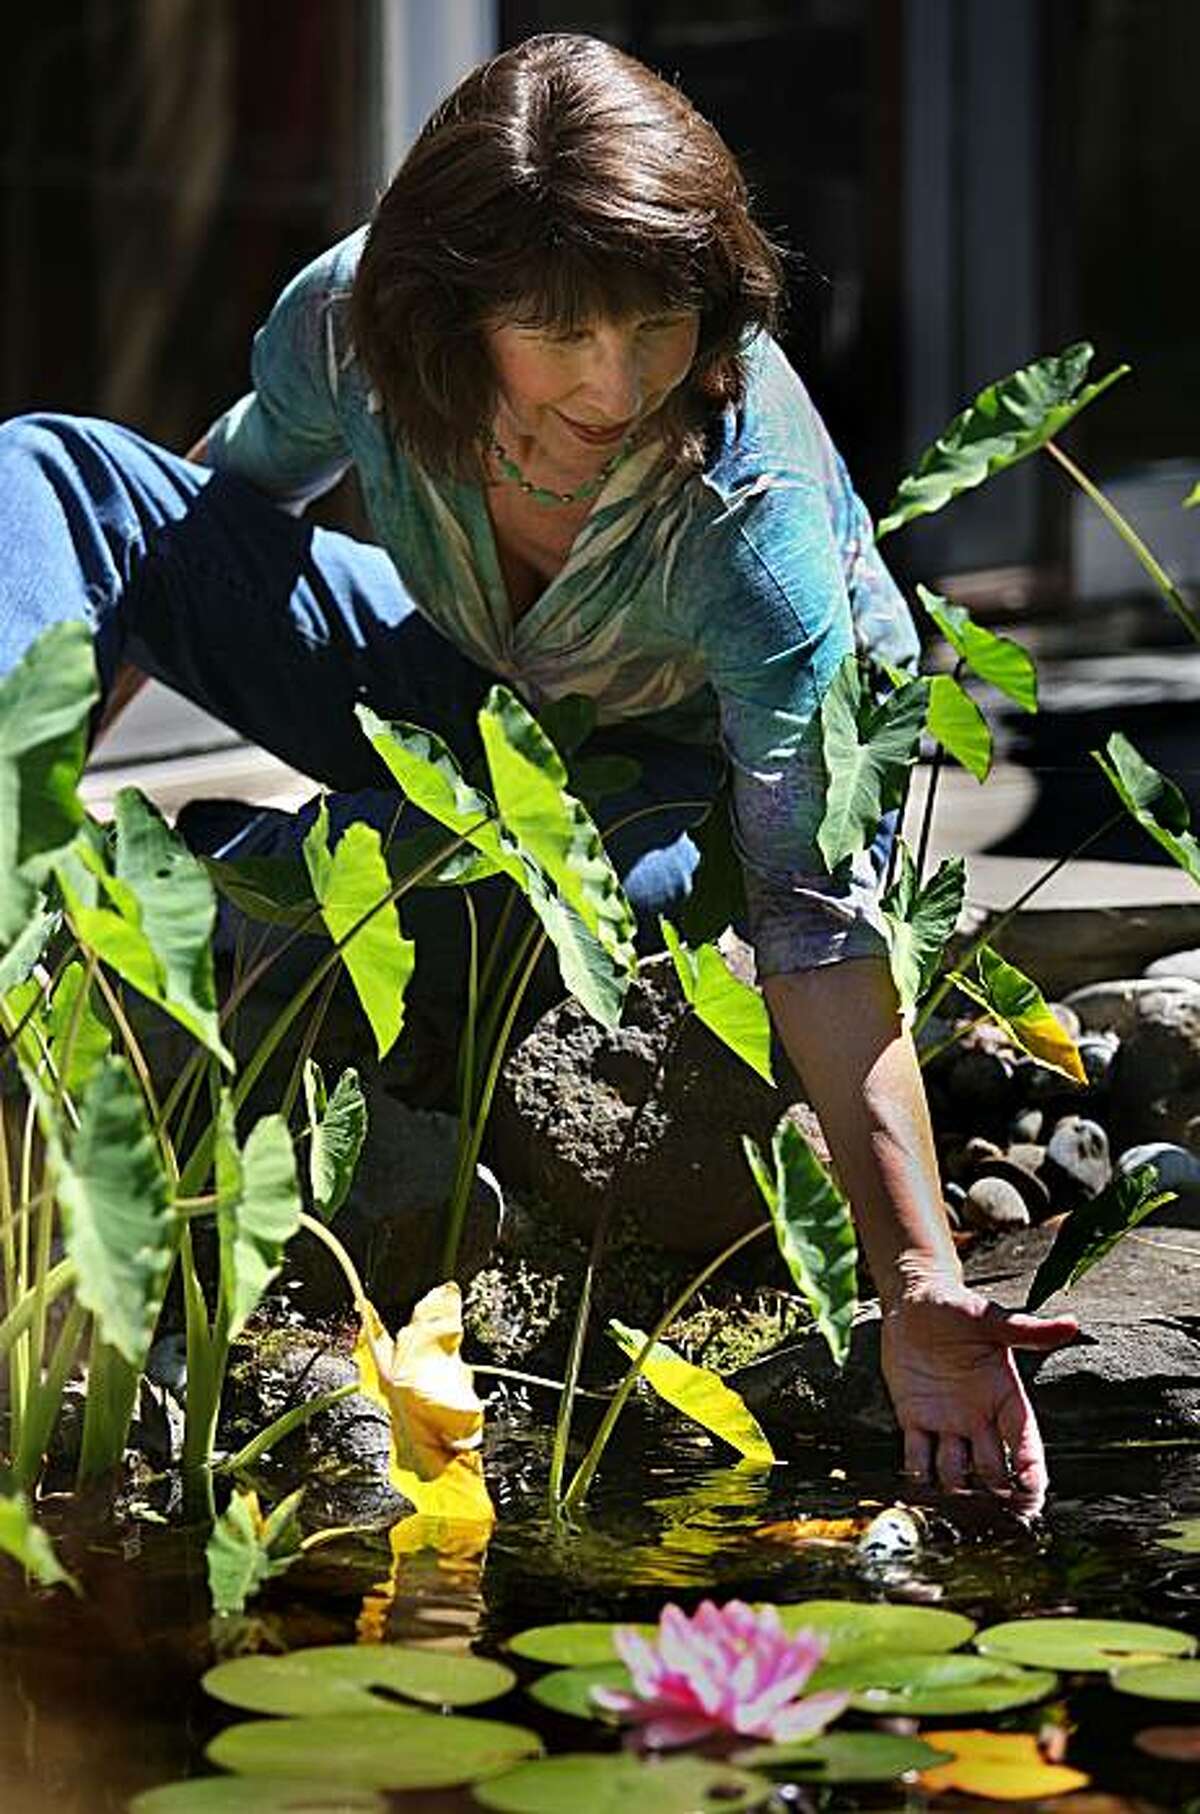 Donne Davis, who started GaGa Sisterhood--a social network for enthusiastic grandmas--hand feeds her fish in her garden in Menlo Park, Calif., on Monday, August 2, 2010. She mentions her grandchildren really love feeding and petting the koi.